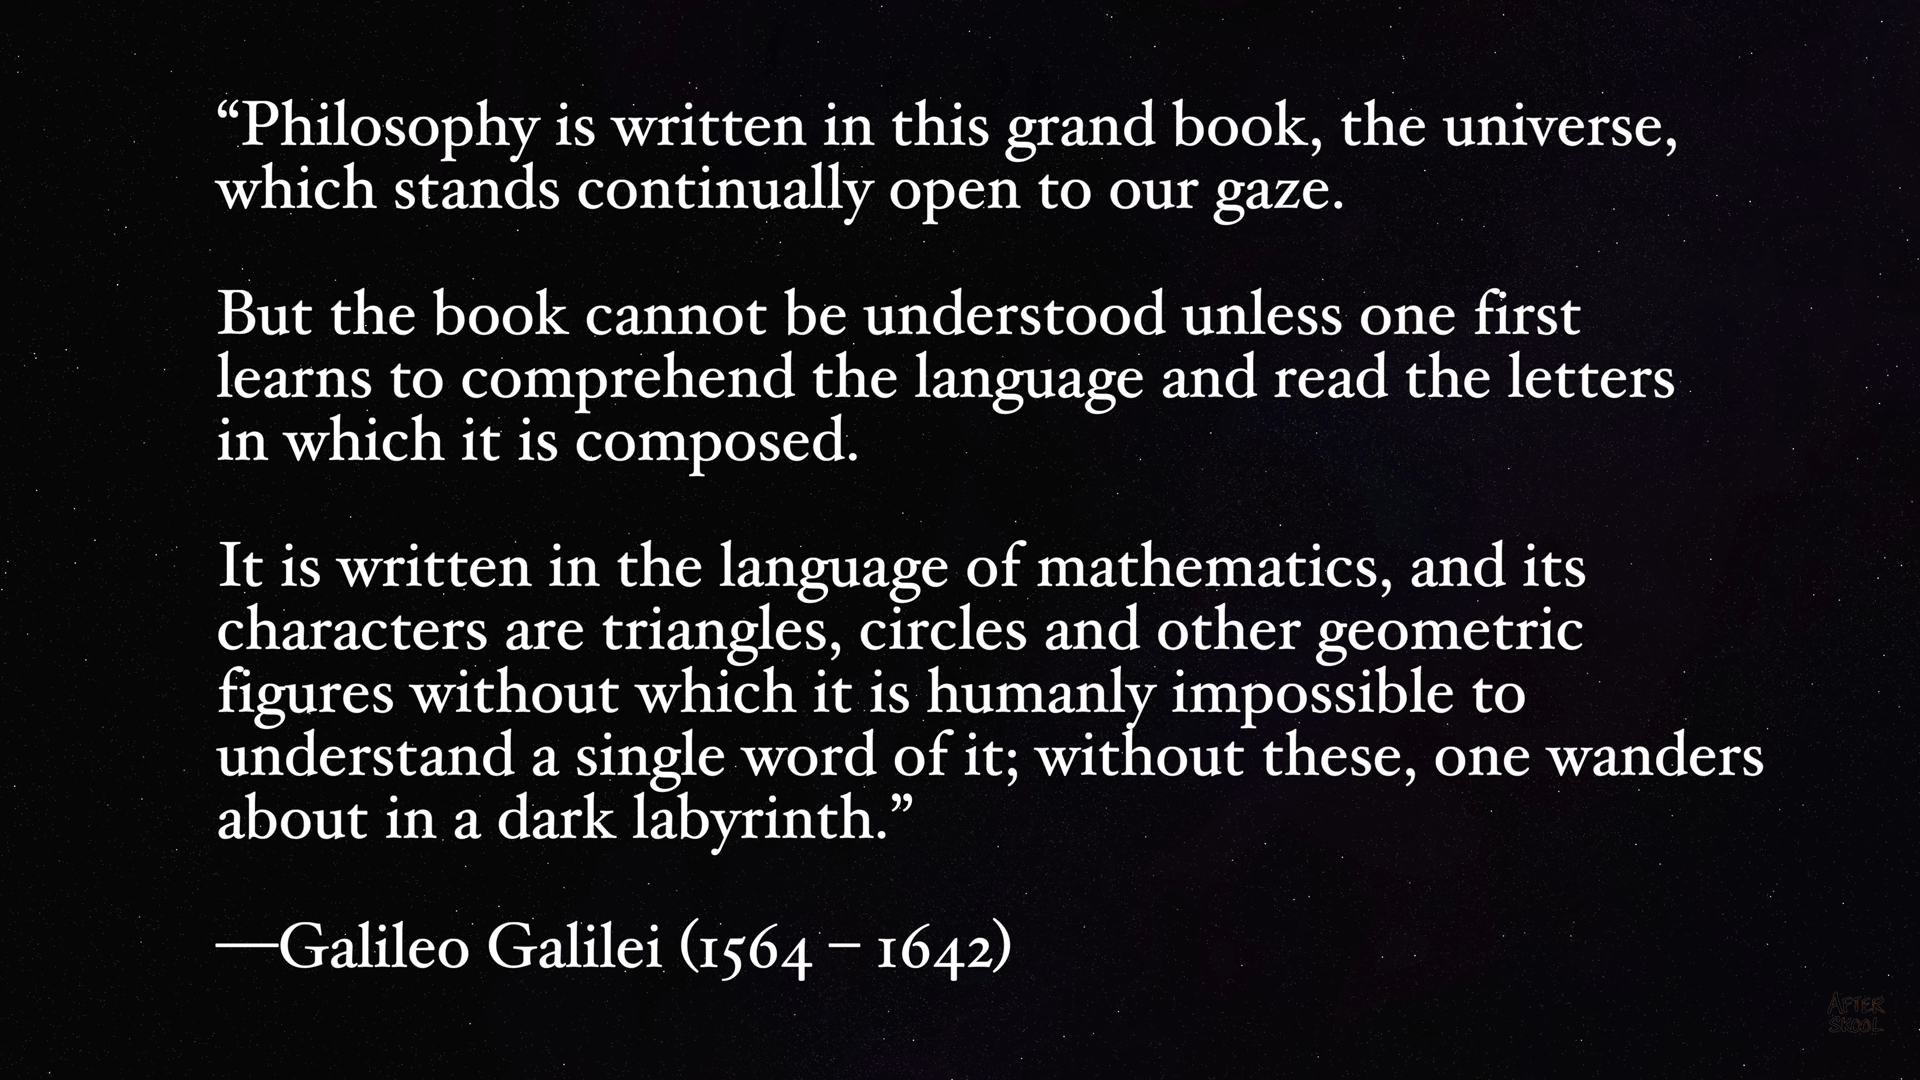 “Philosophy is written in this grand book, the universe,
which stands continually open to our gaze.

But the book cannot be understood unless one first
learns to comprehend the language and read the letters
in which it is composed.

It is written in the language of mathematics, and its
characters are triangles, circles and other geometric
figures without which it is humanly impossible to
understand a single word of it; Sato these, one wanders
about in a dark labyrinth.”

—Galileo Galilei (1564 — 1642)